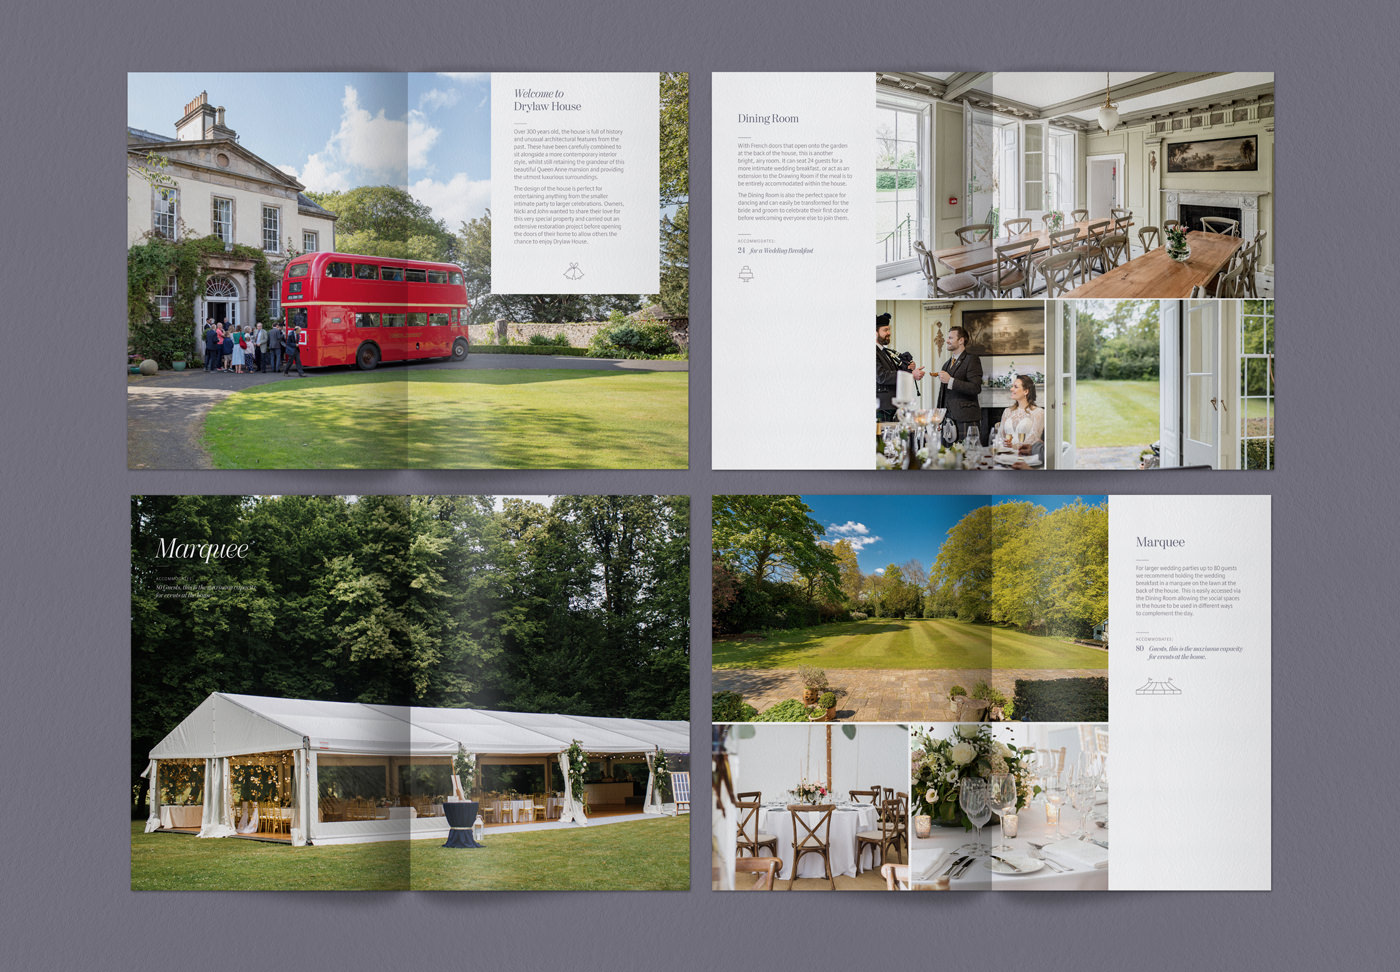 Drylaw House weddings brochure inside pages